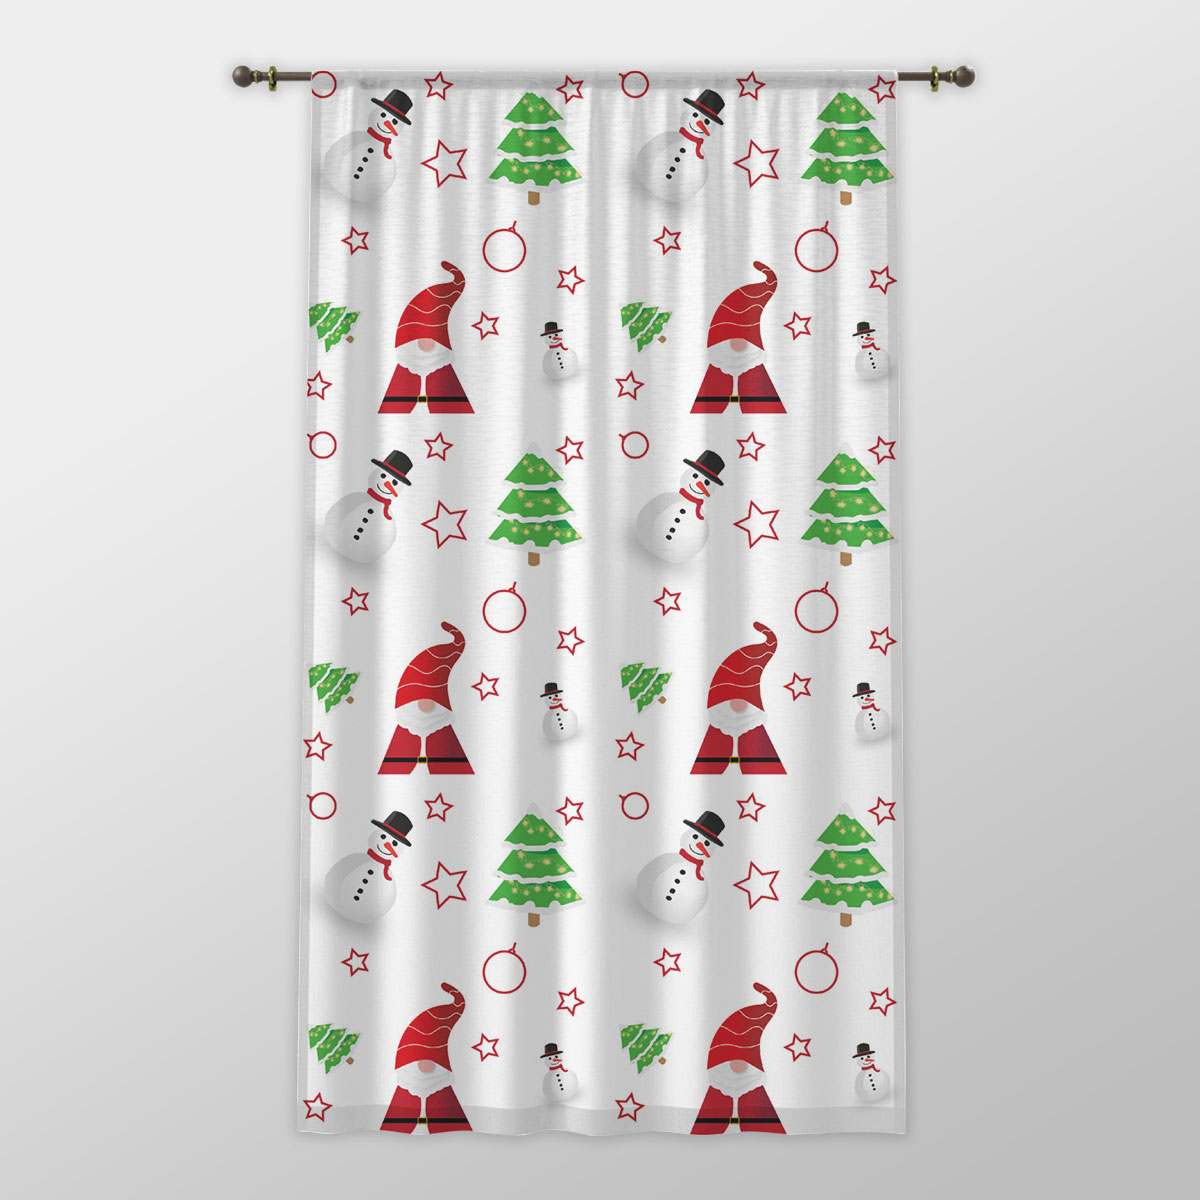 Santa Claus, Snowman Clipart And Pine Tree Silhouette Seamless Pattern One-side Printed Window Curtain